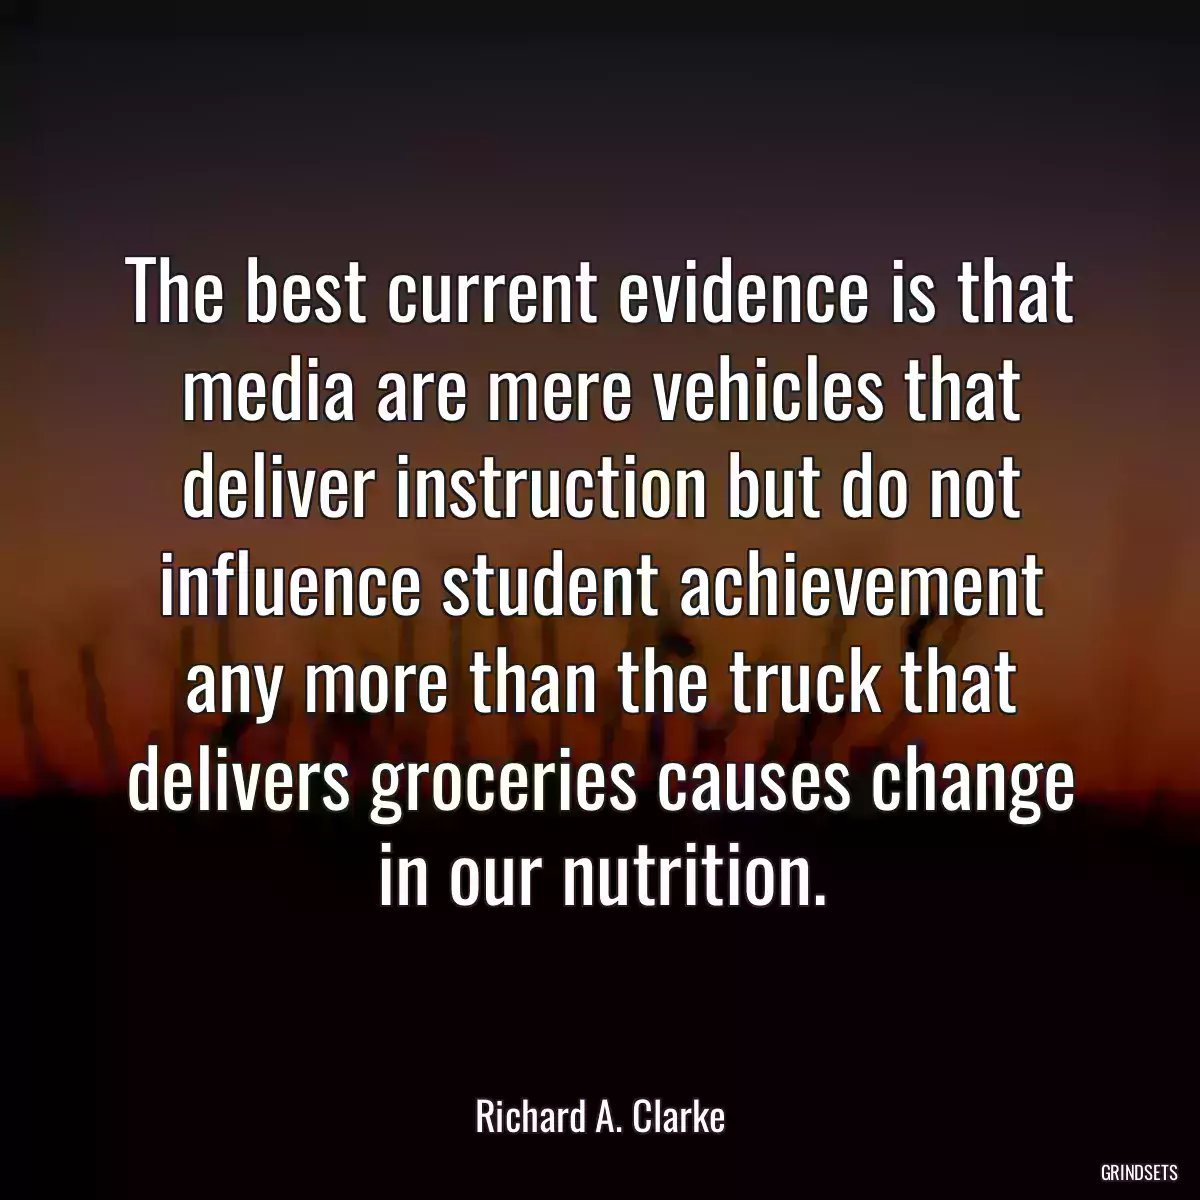 The best current evidence is that media are mere vehicles that deliver instruction but do not influence student achievement any more than the truck that delivers groceries causes change in our nutrition.